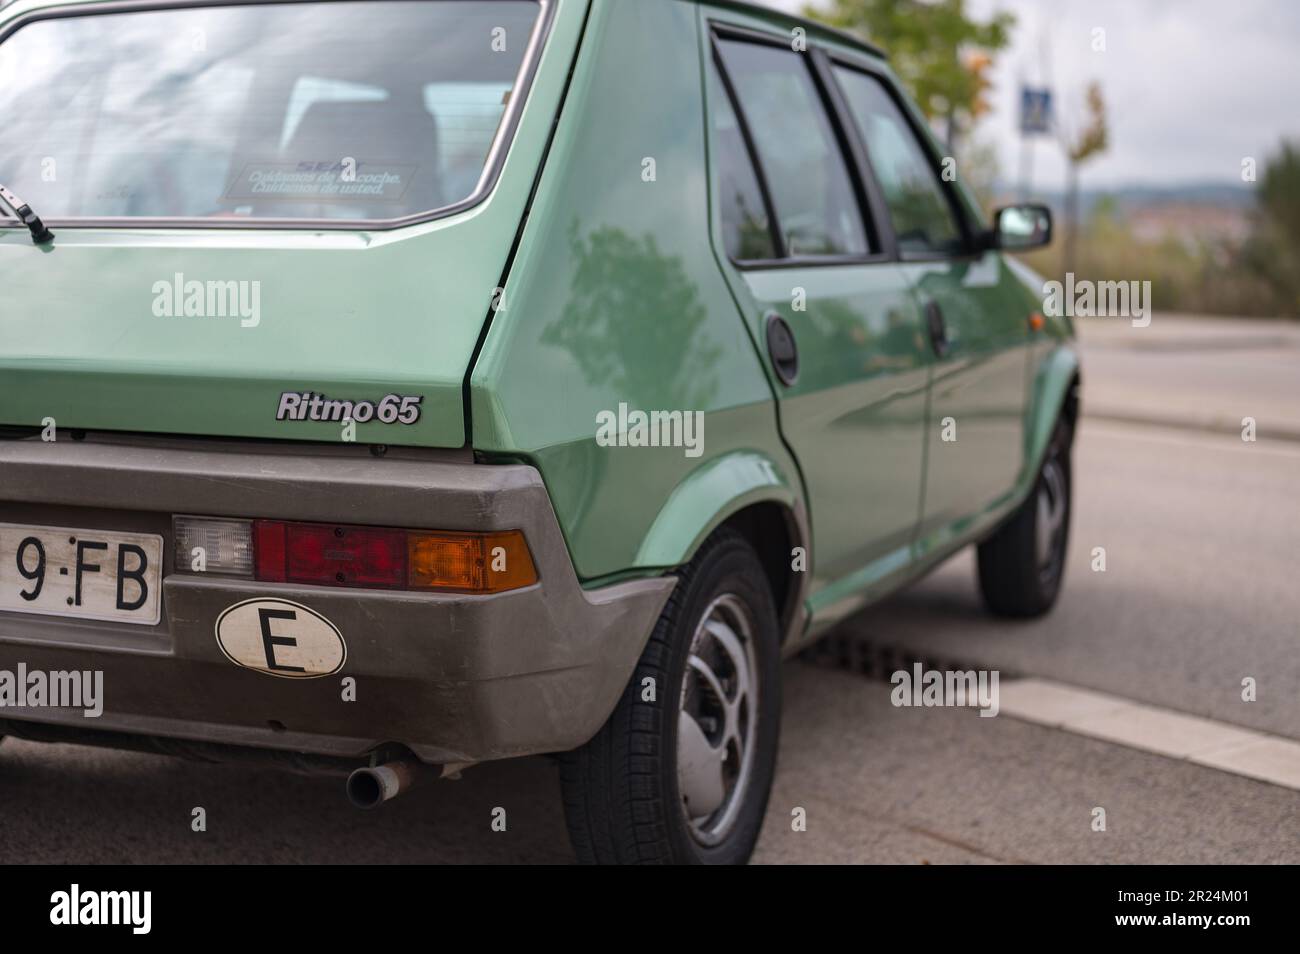 Detail of an old Spanish car, the Seat Ritmo 65 in lime green Stock Photo